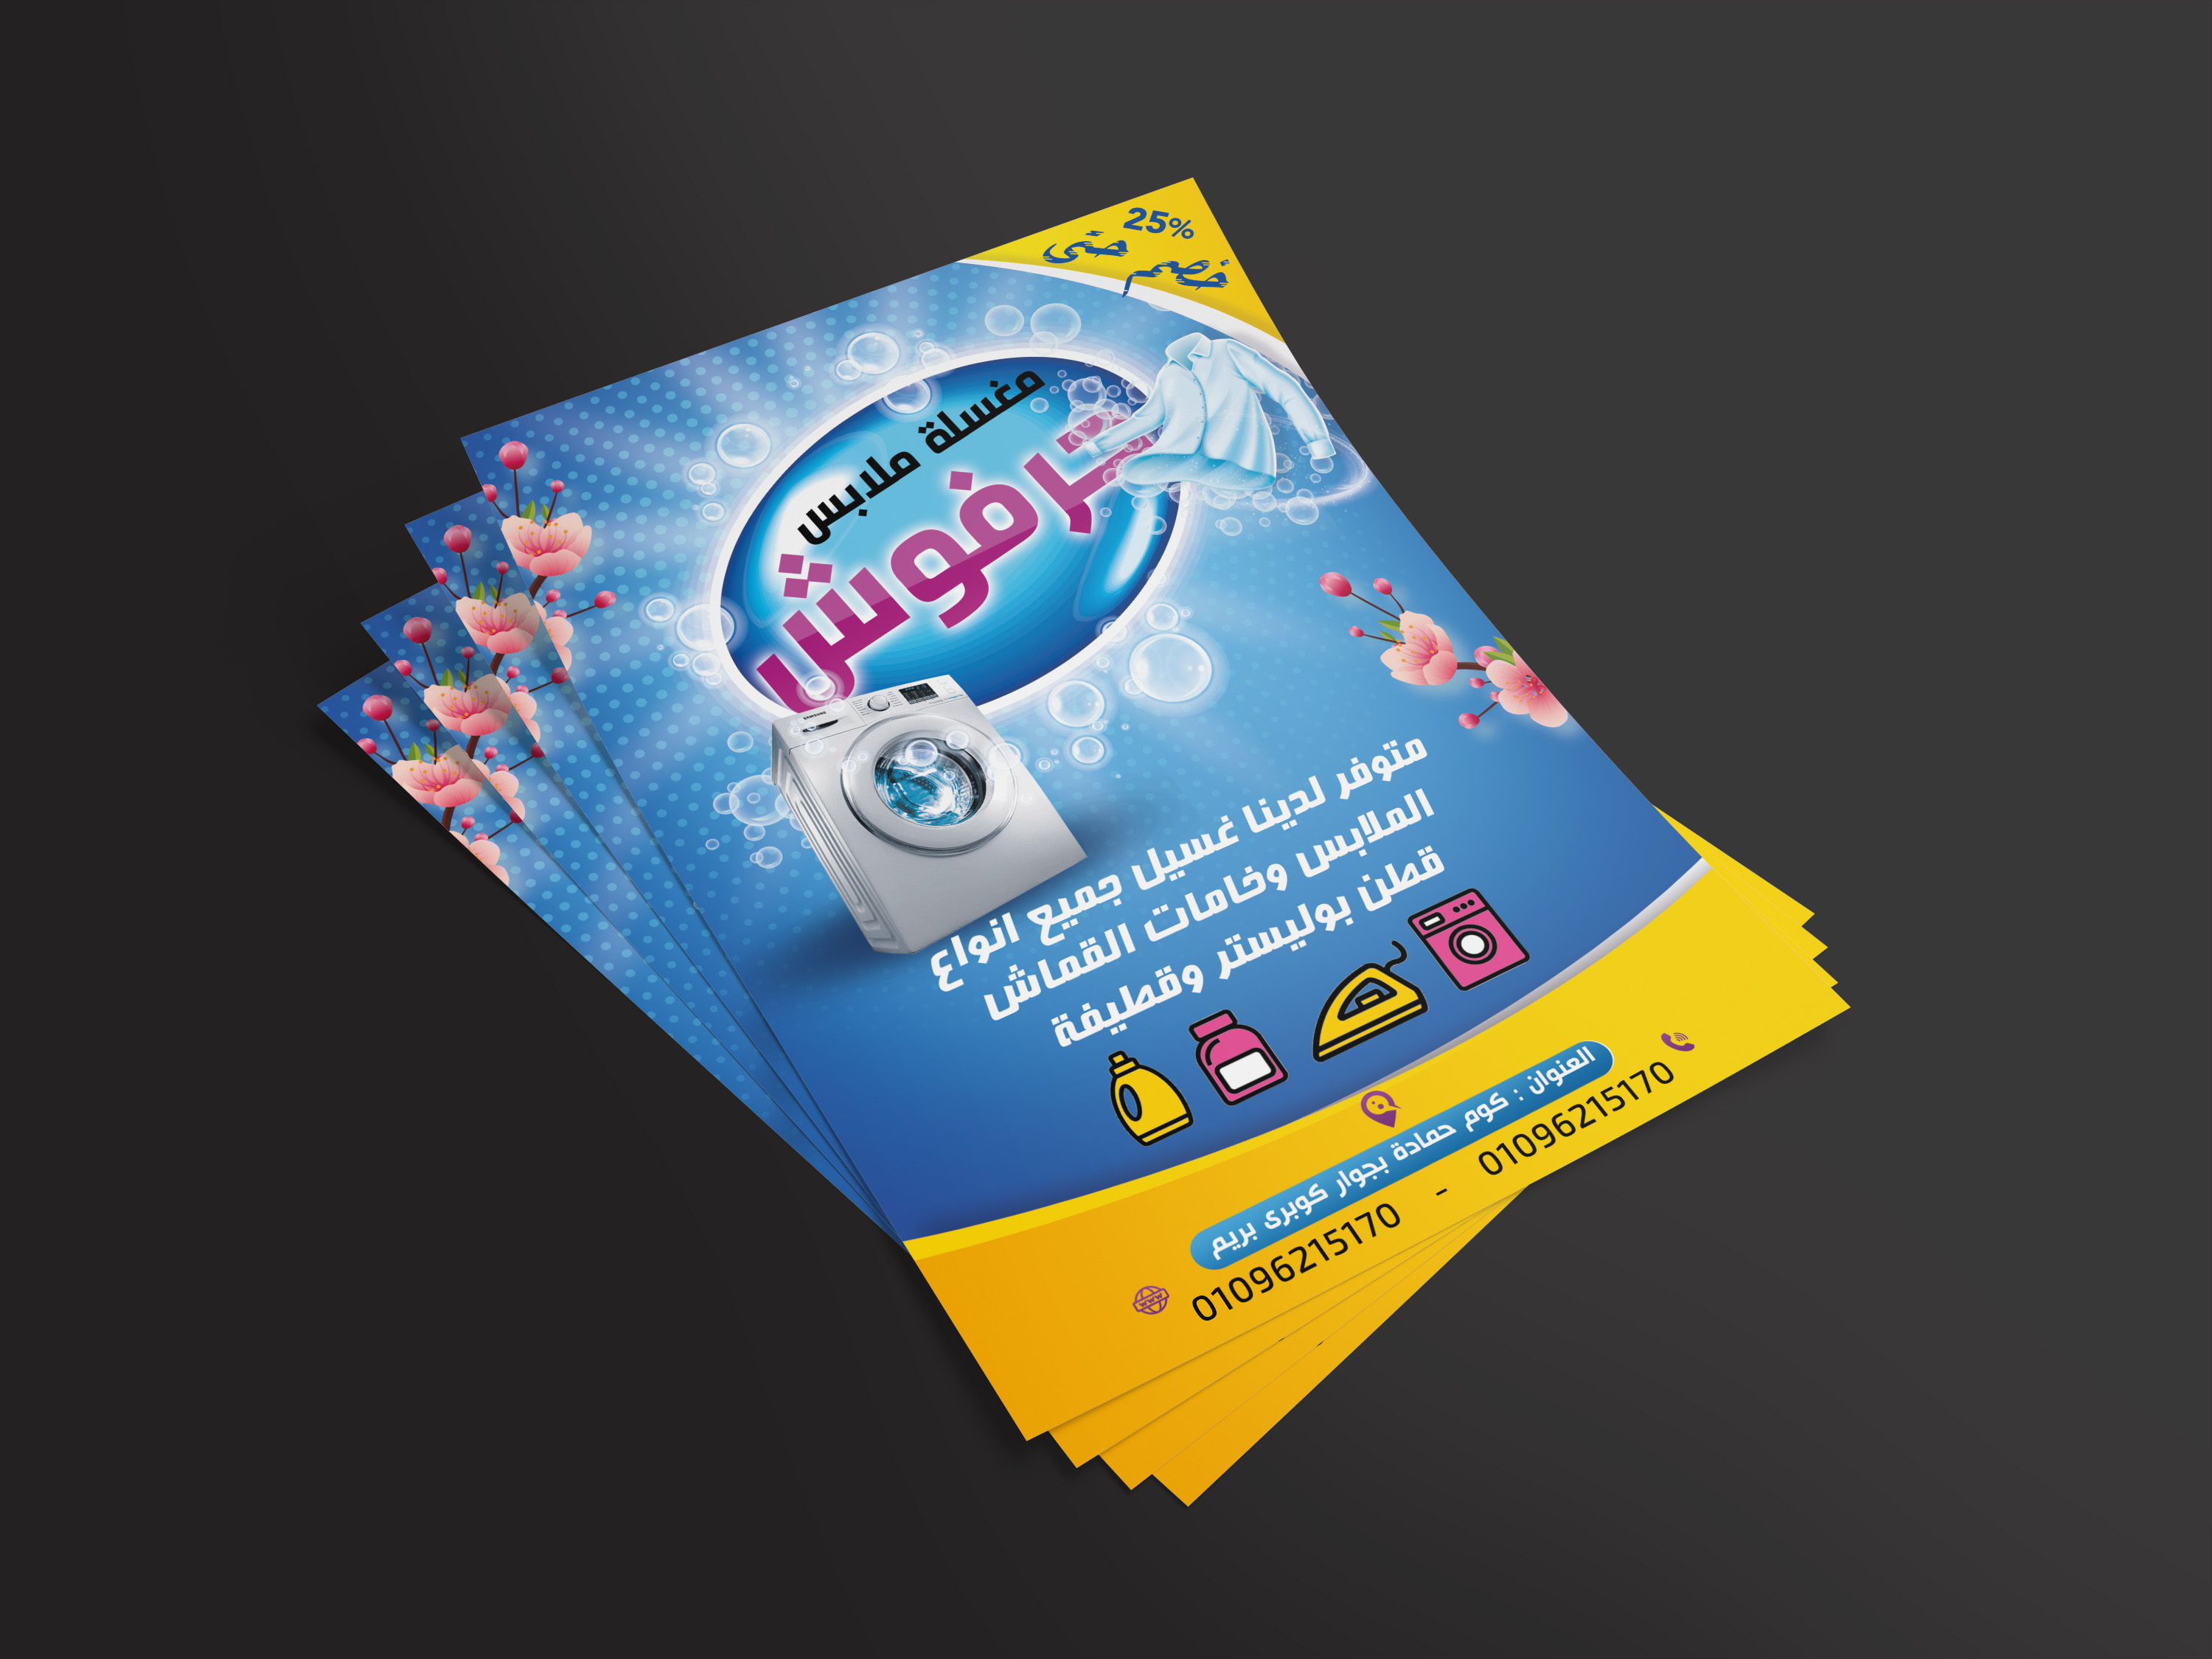 Laundry flyer design psd free download open source